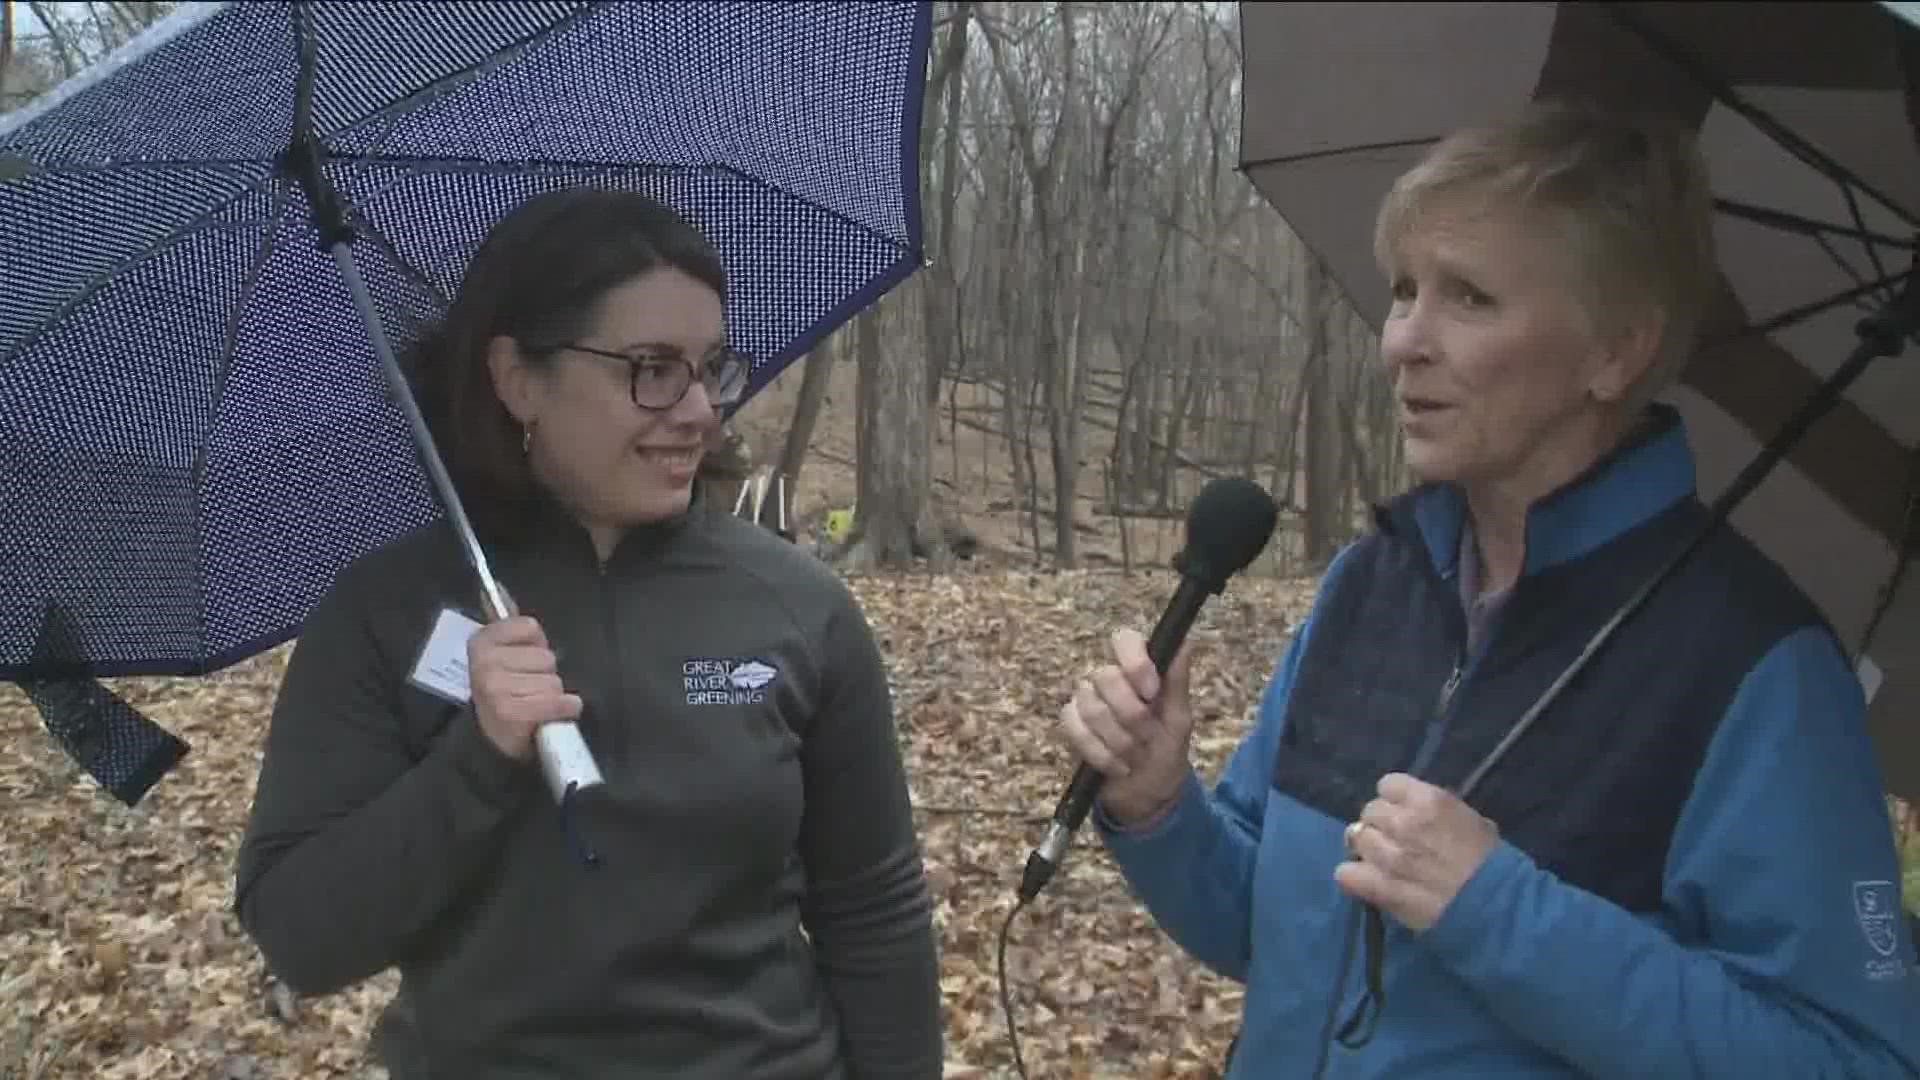 During KARE 11 Saturday, officials and volunteers from Great River Greening spoke about the group's efforts and what it means on Earth Day.